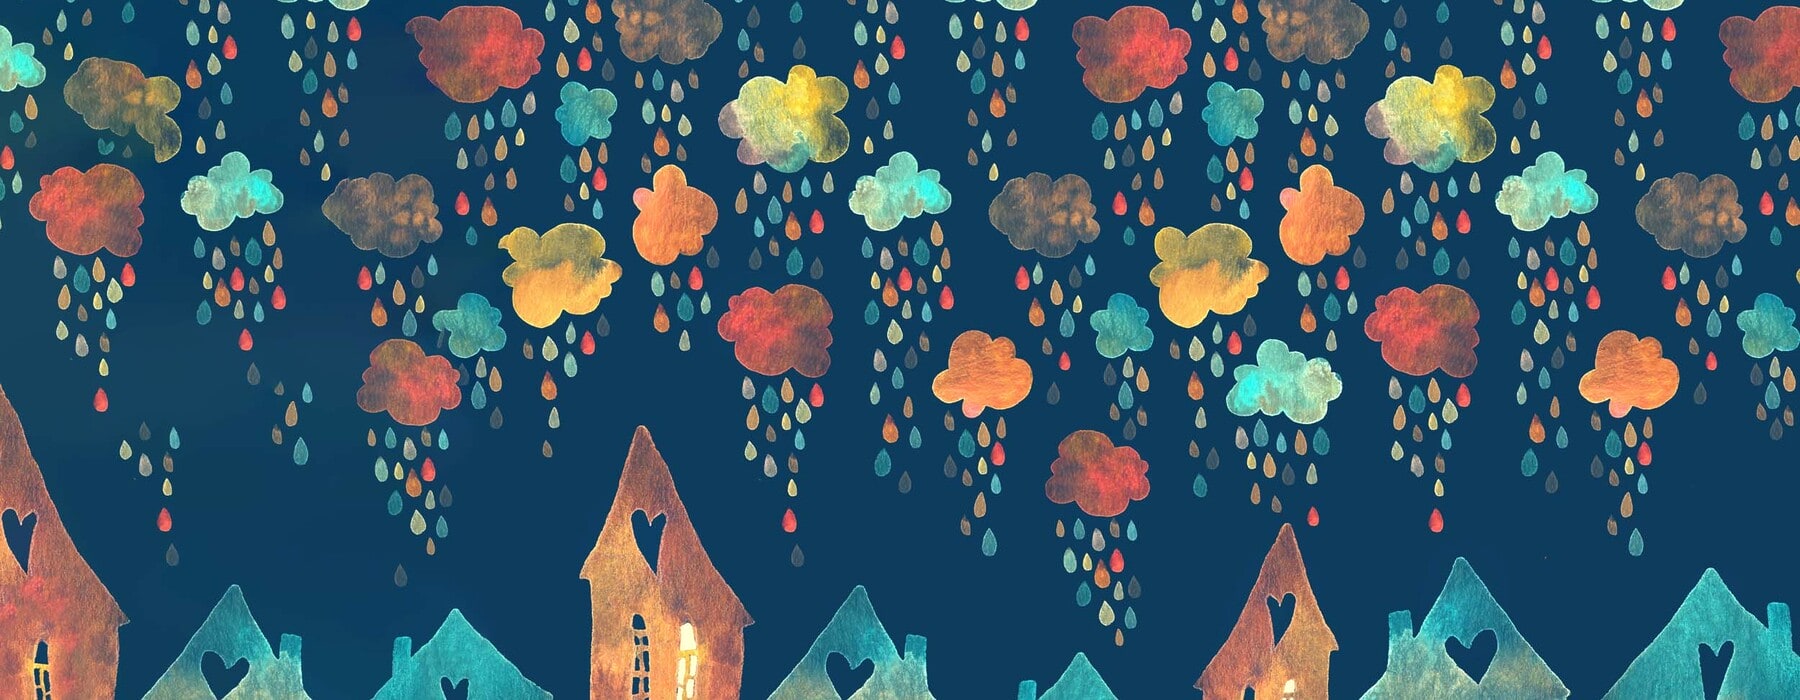 illustration of rain clouds pouring on a group of houses